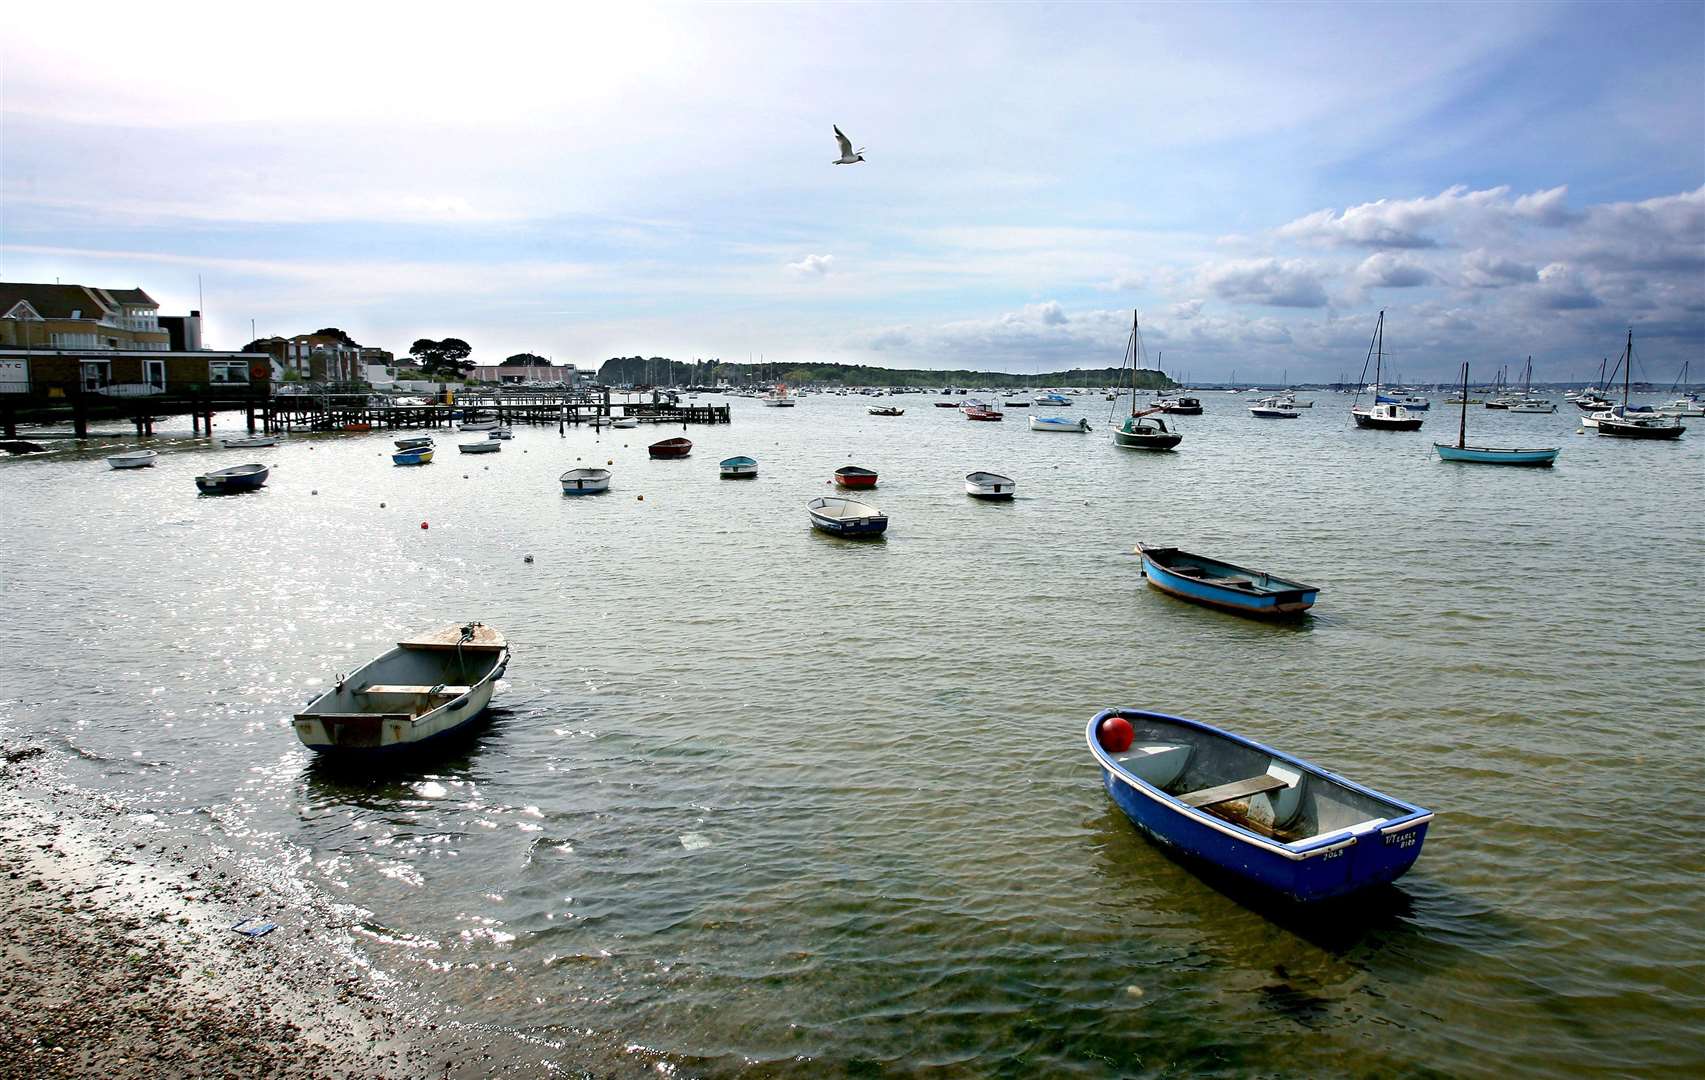 Parts of Dorset have seen a jump in housing supply, according to Zoopla (Anthony Devlin/PA)